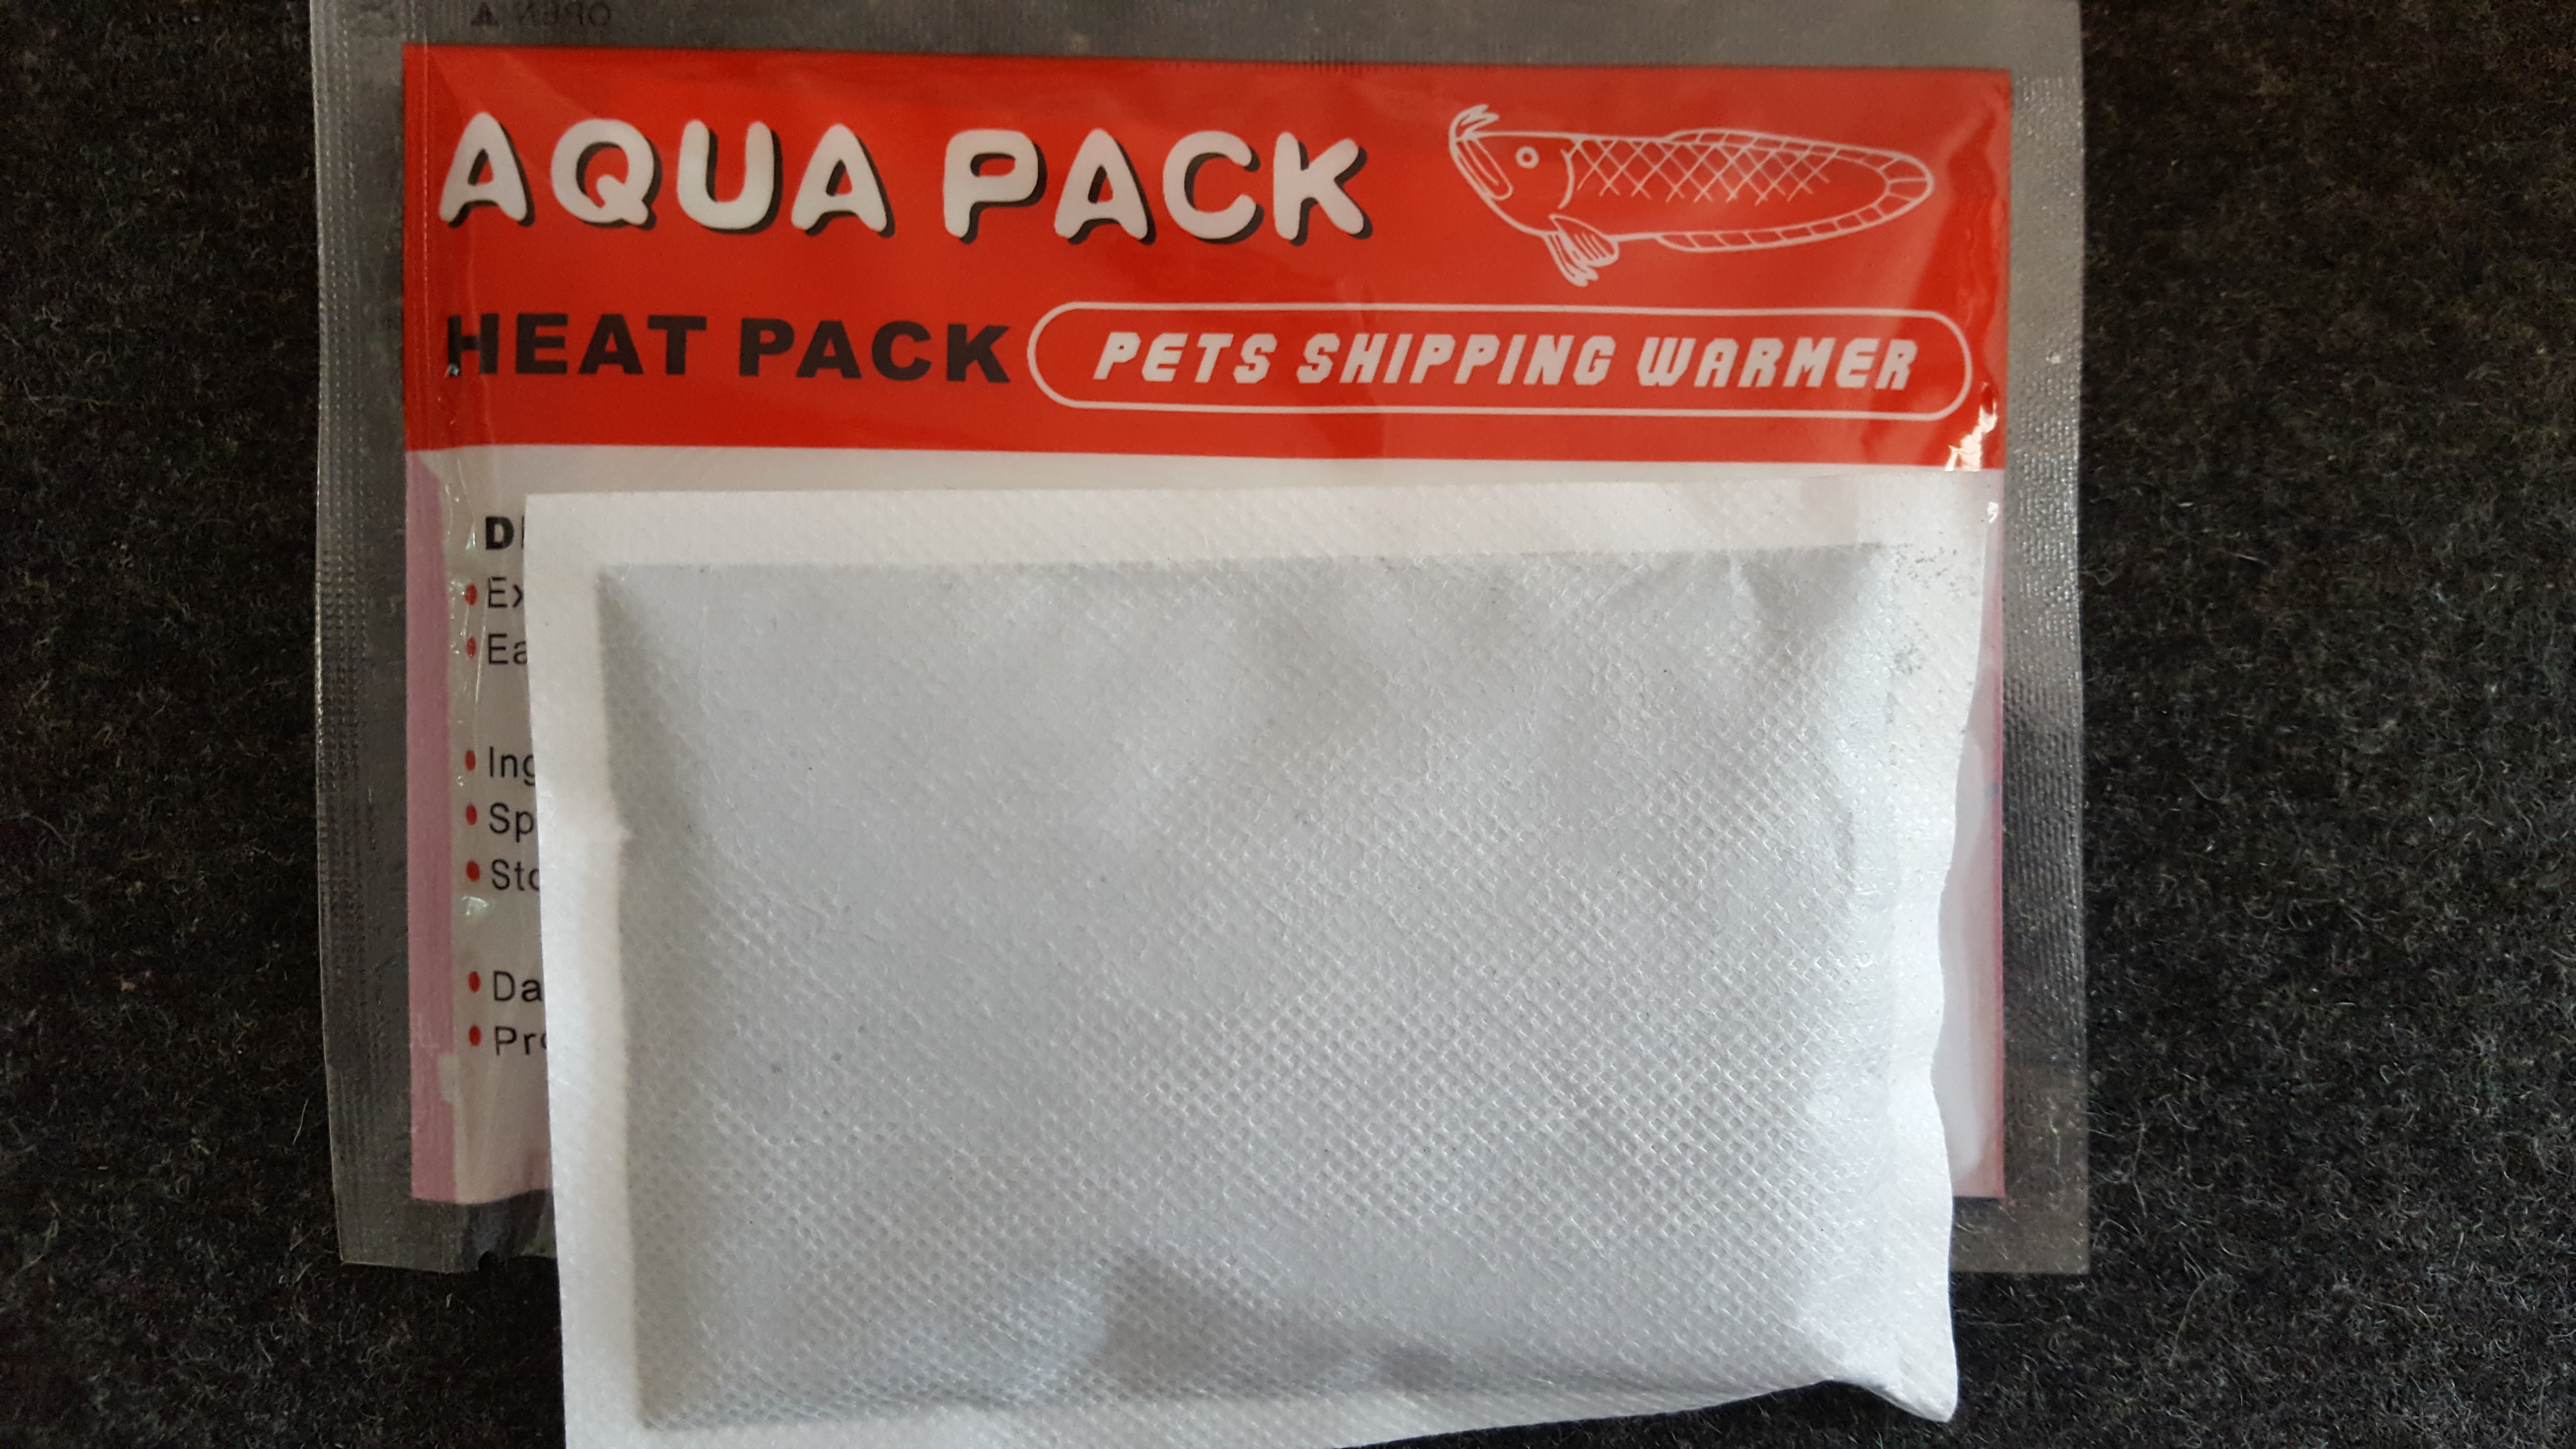 Reptile Heat Pack Can Keep Warm For 40 Hours